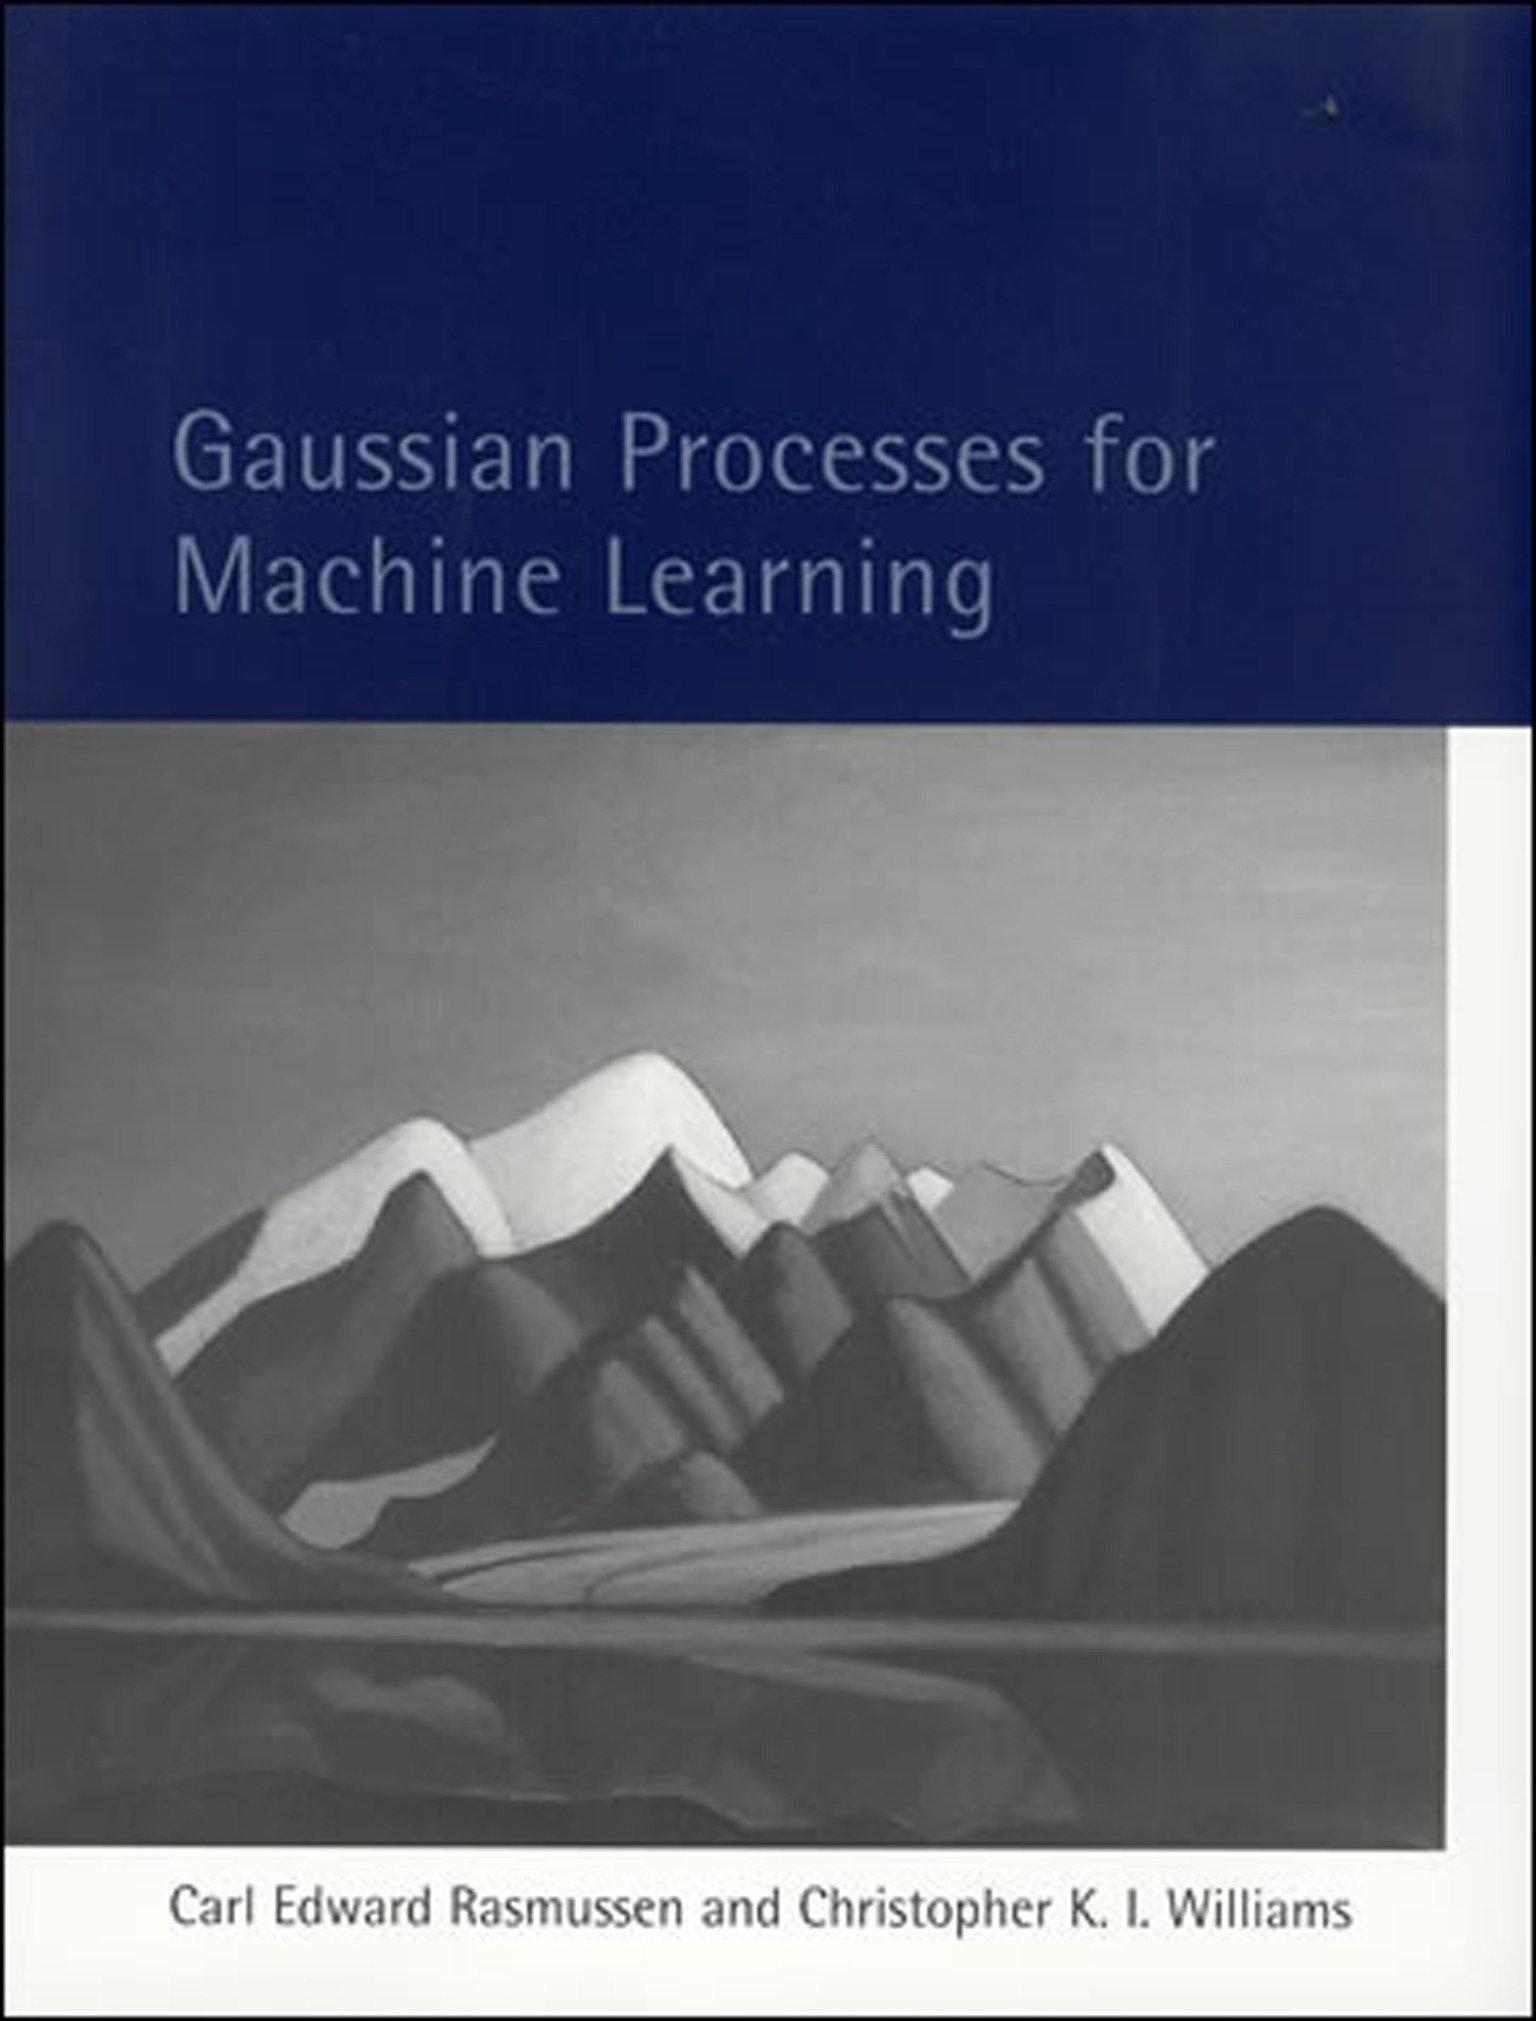 Gaussian Processes for Machine Learning - Carl Edward Rasmussen Christopher K. I. Williams